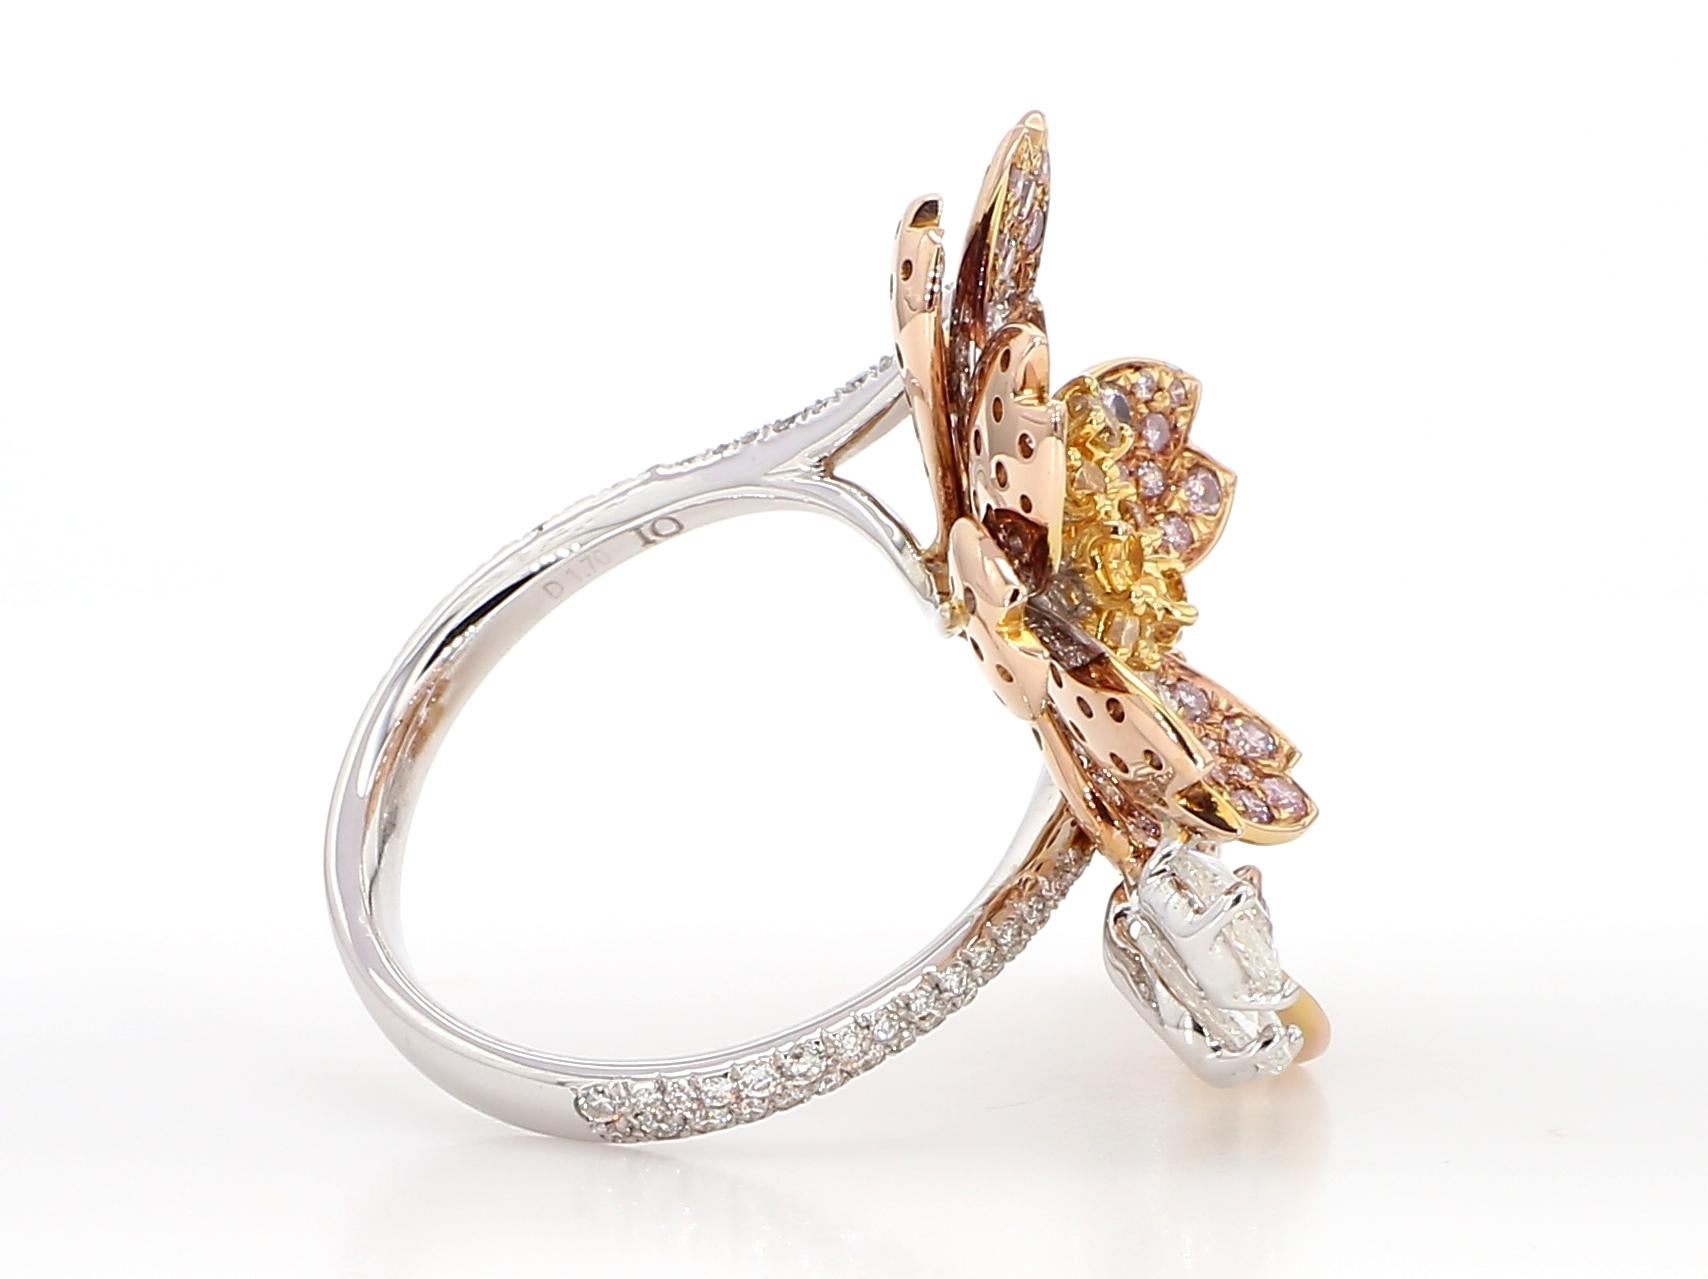 Marquise Cut 2.67 Carat Pink and Yellow Diamonds, Cocktail Ring, Floral Motif, 18K Rose Gold. For Sale